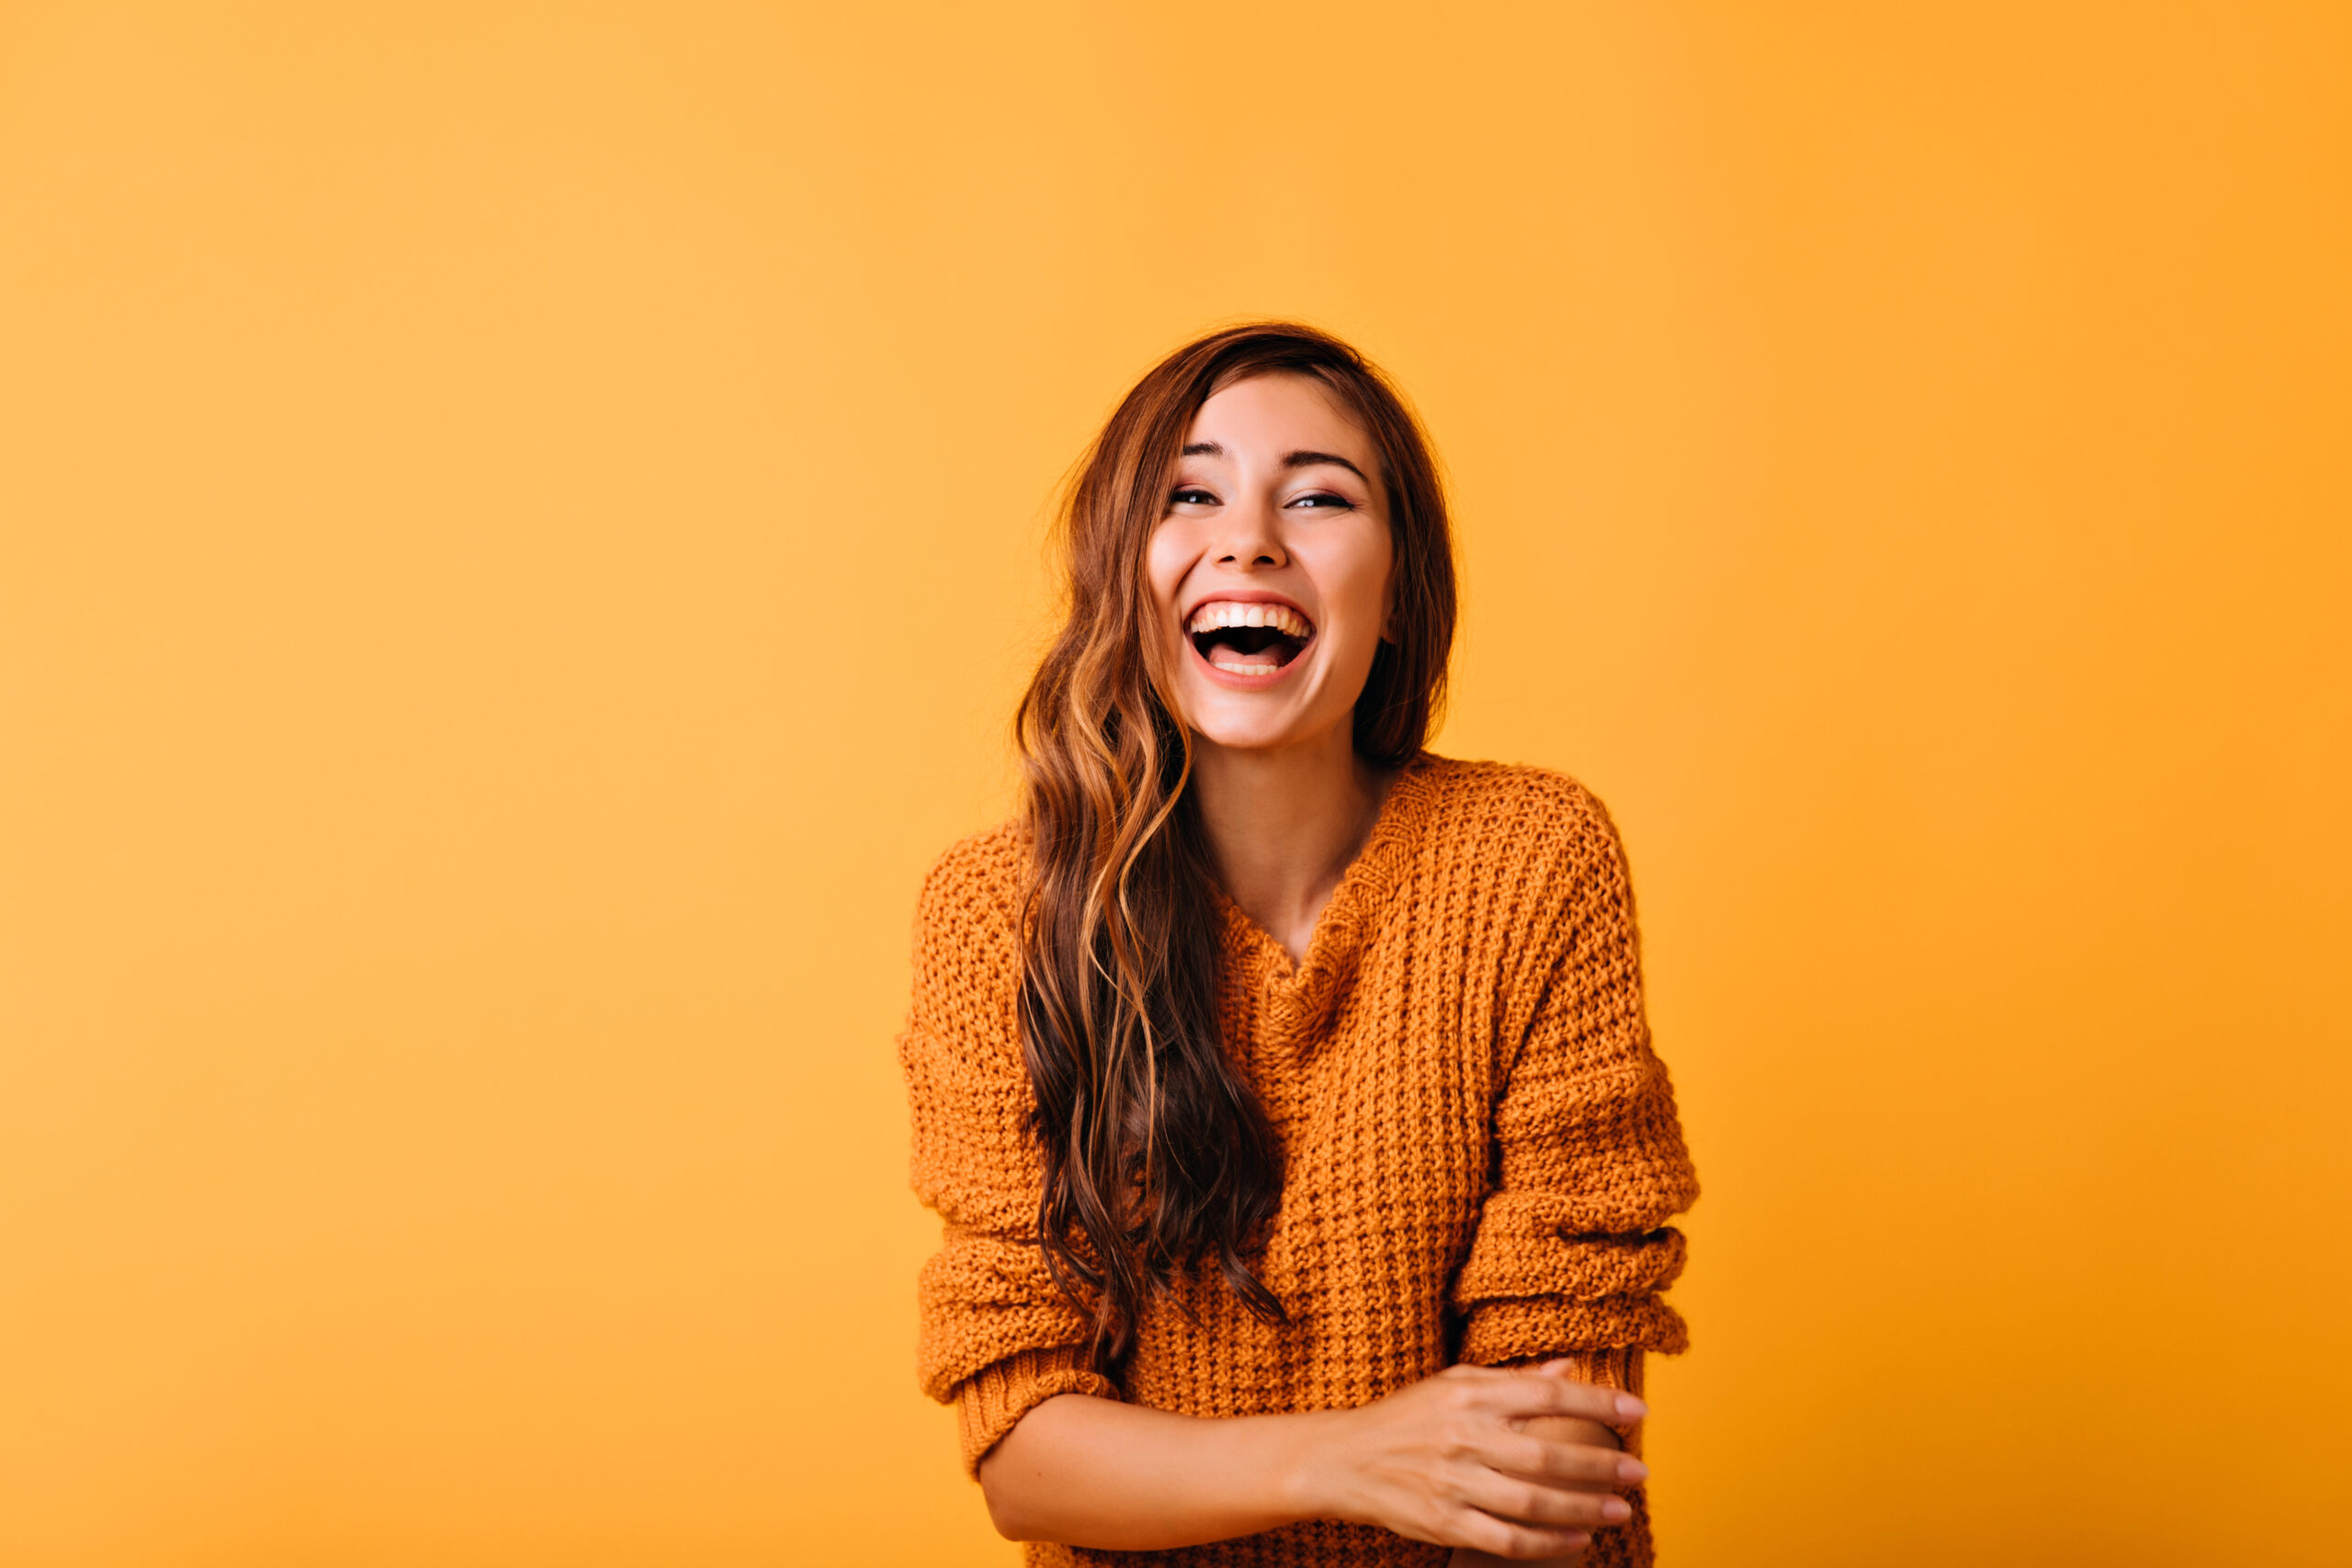 Enthusiastic white girl with long shiny hair laughing on orange background. Excited european woman posing with sincere smile.